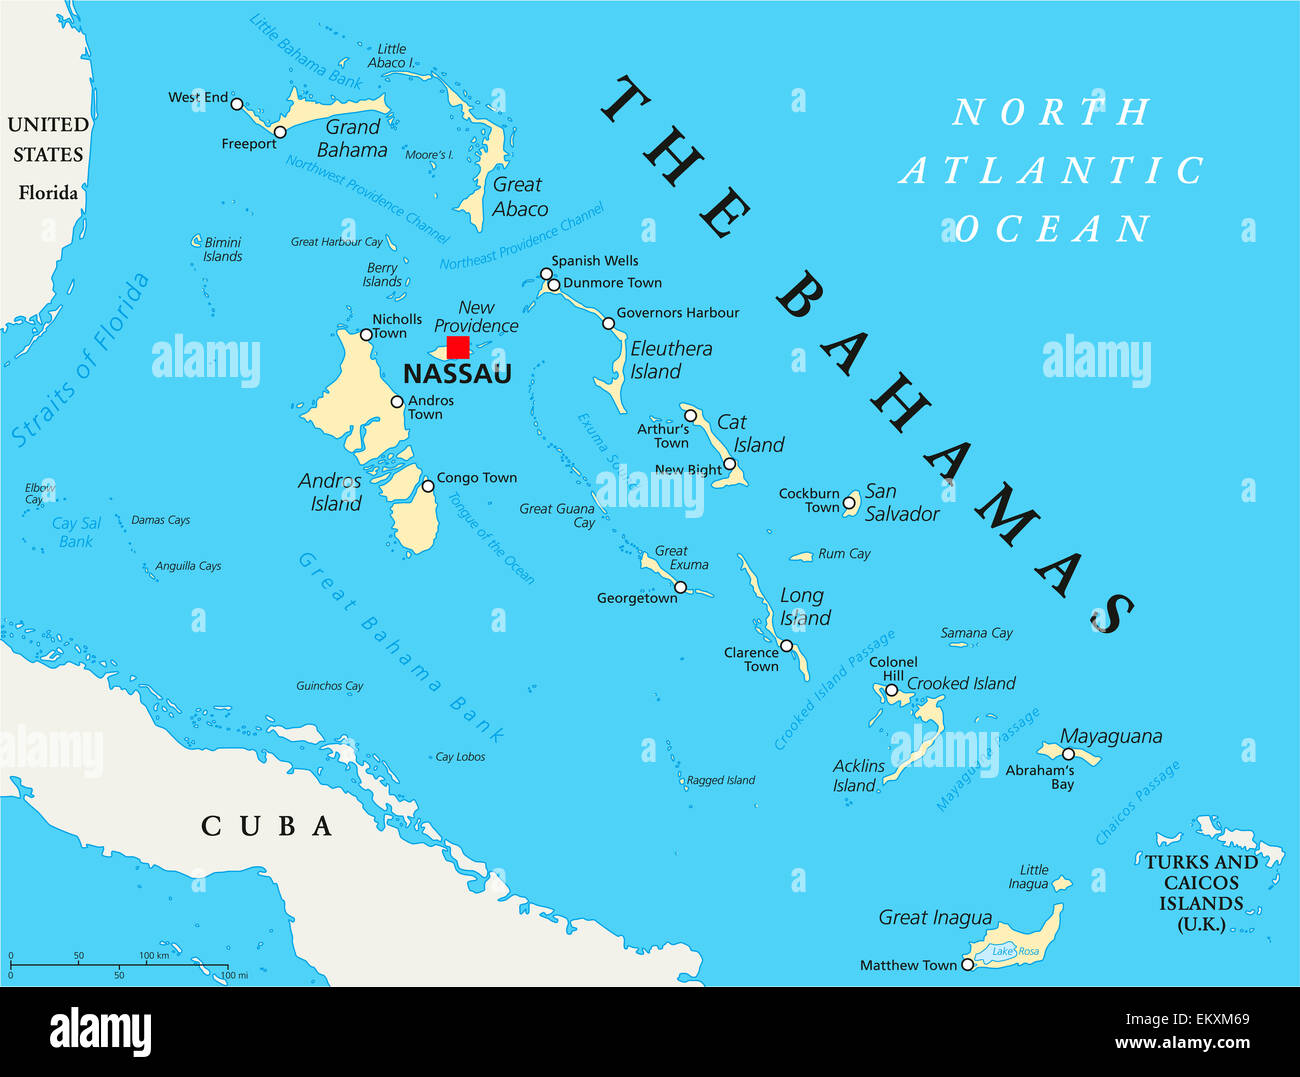 The Bahamas Political Map with capital Nassau, important cities and places. English labeling and scaling. Illustration. Stock Photo